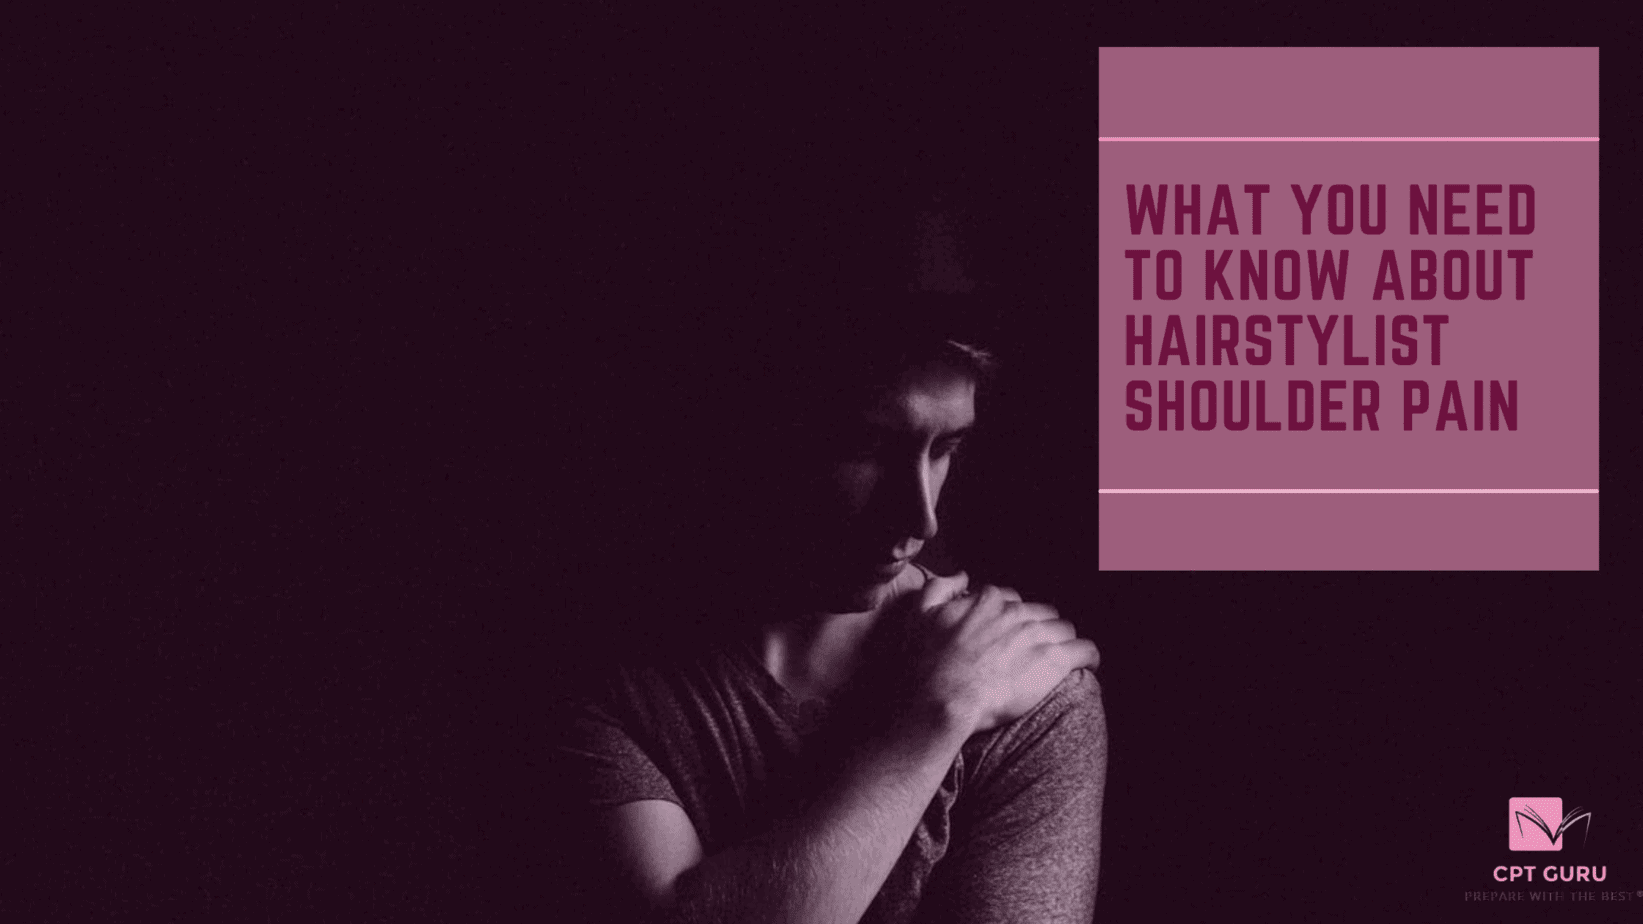 What You Need to Know About Hairstylist Shoulder Pain